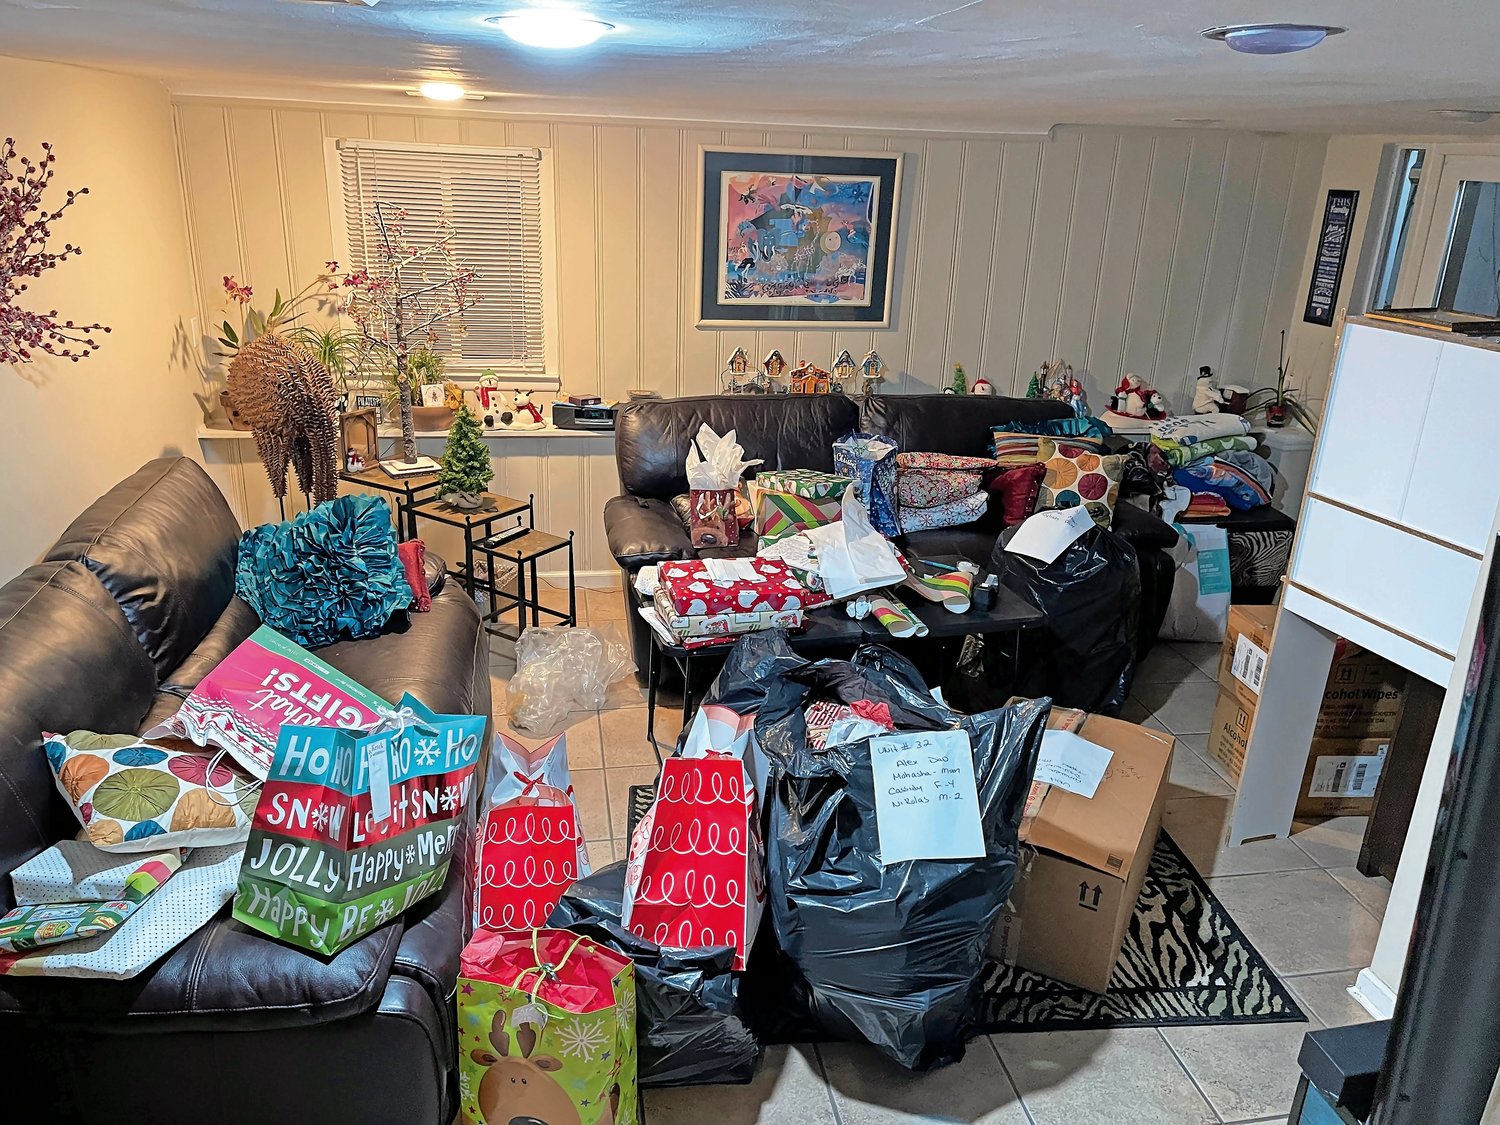 Gail Mancuso’s living room was filled with some of the many gifts collected.